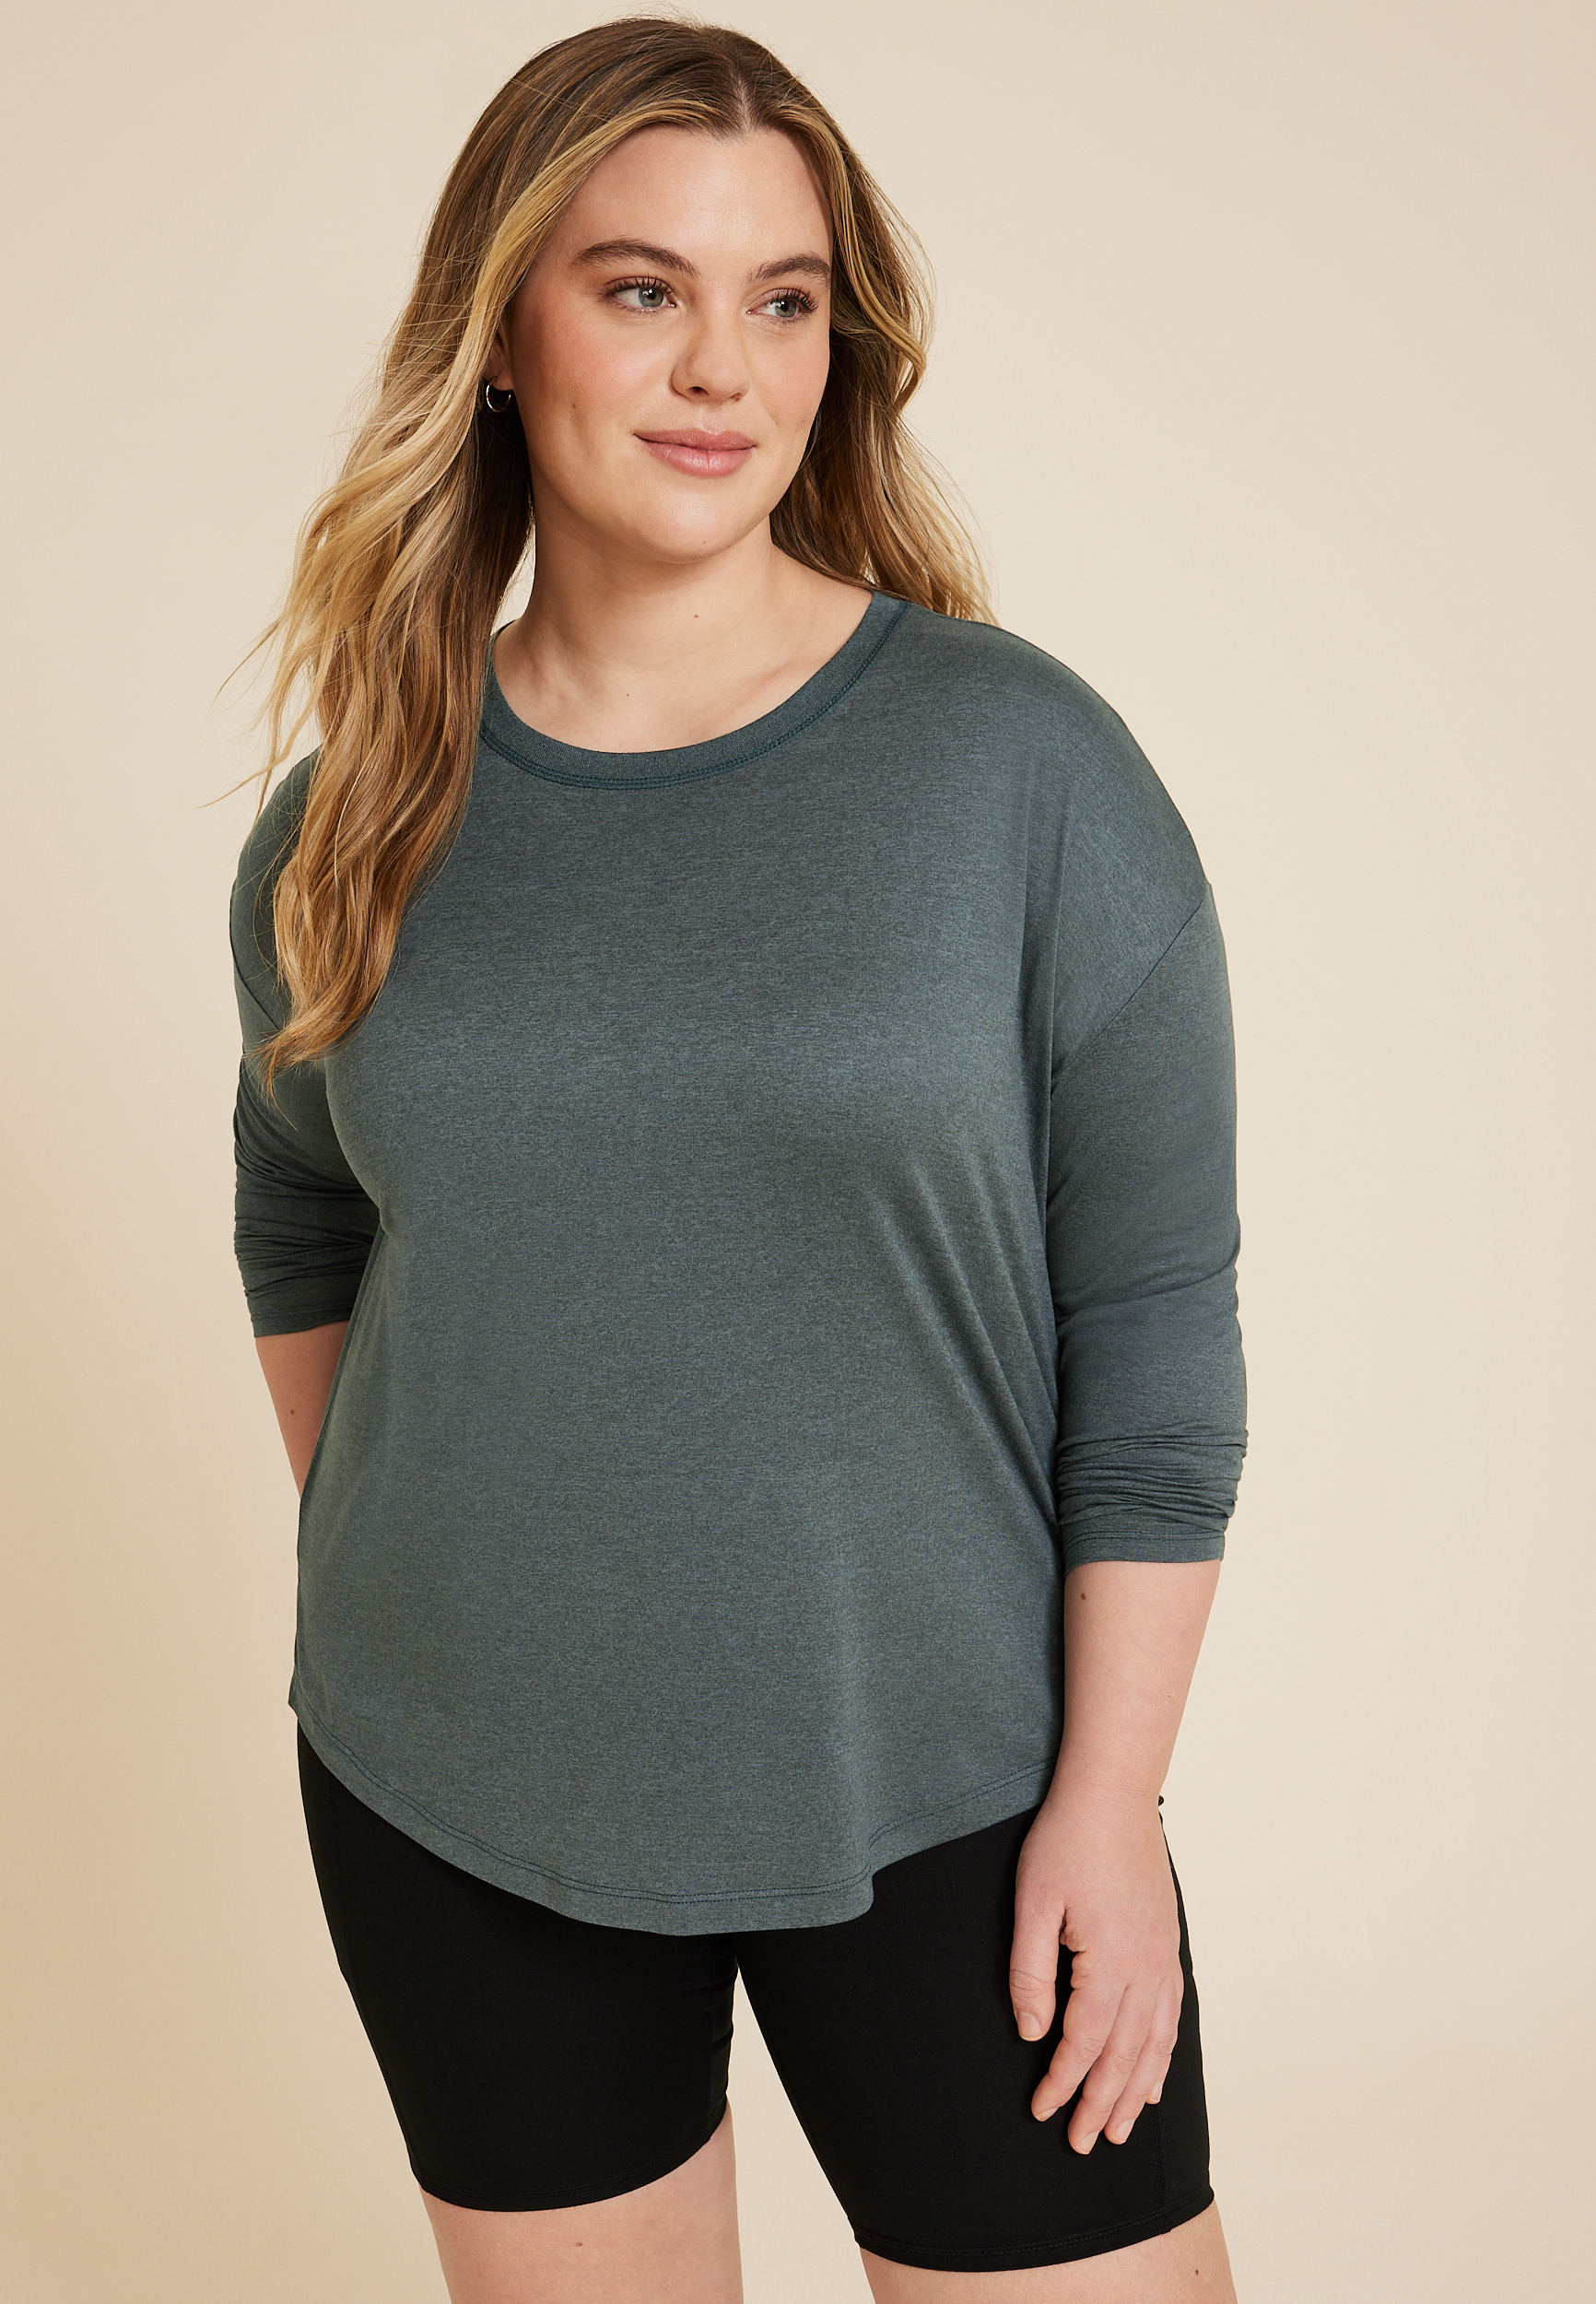 Women's Plus Size Long Sleeve Round Neck Henley Shirt - A New Day Purple 3X